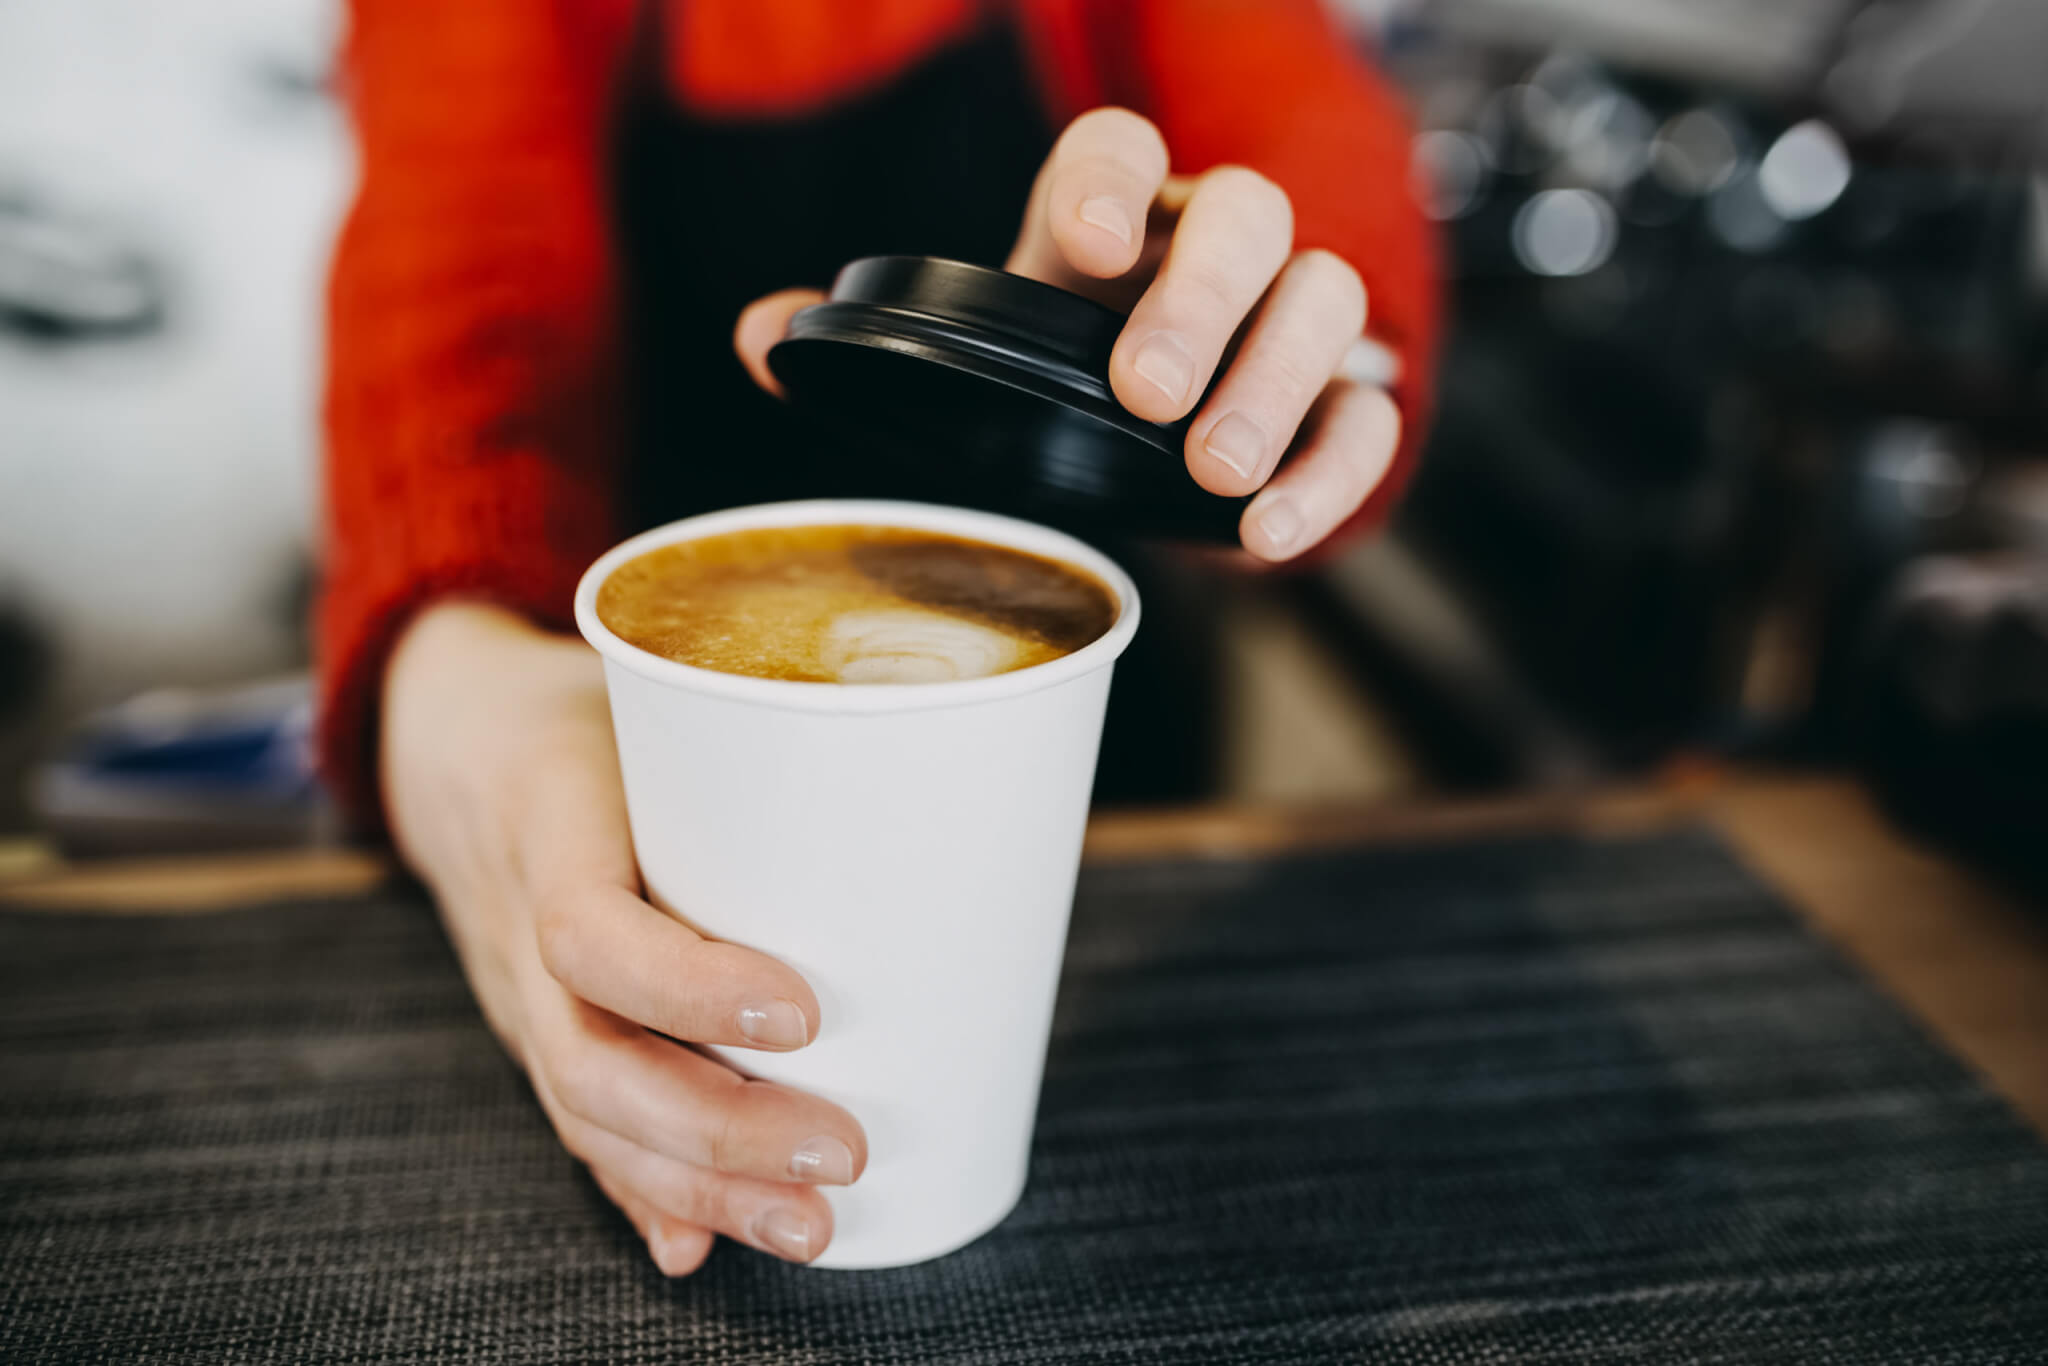 Drinking coffee or tea from paper cups may be 'seriously' bad for your